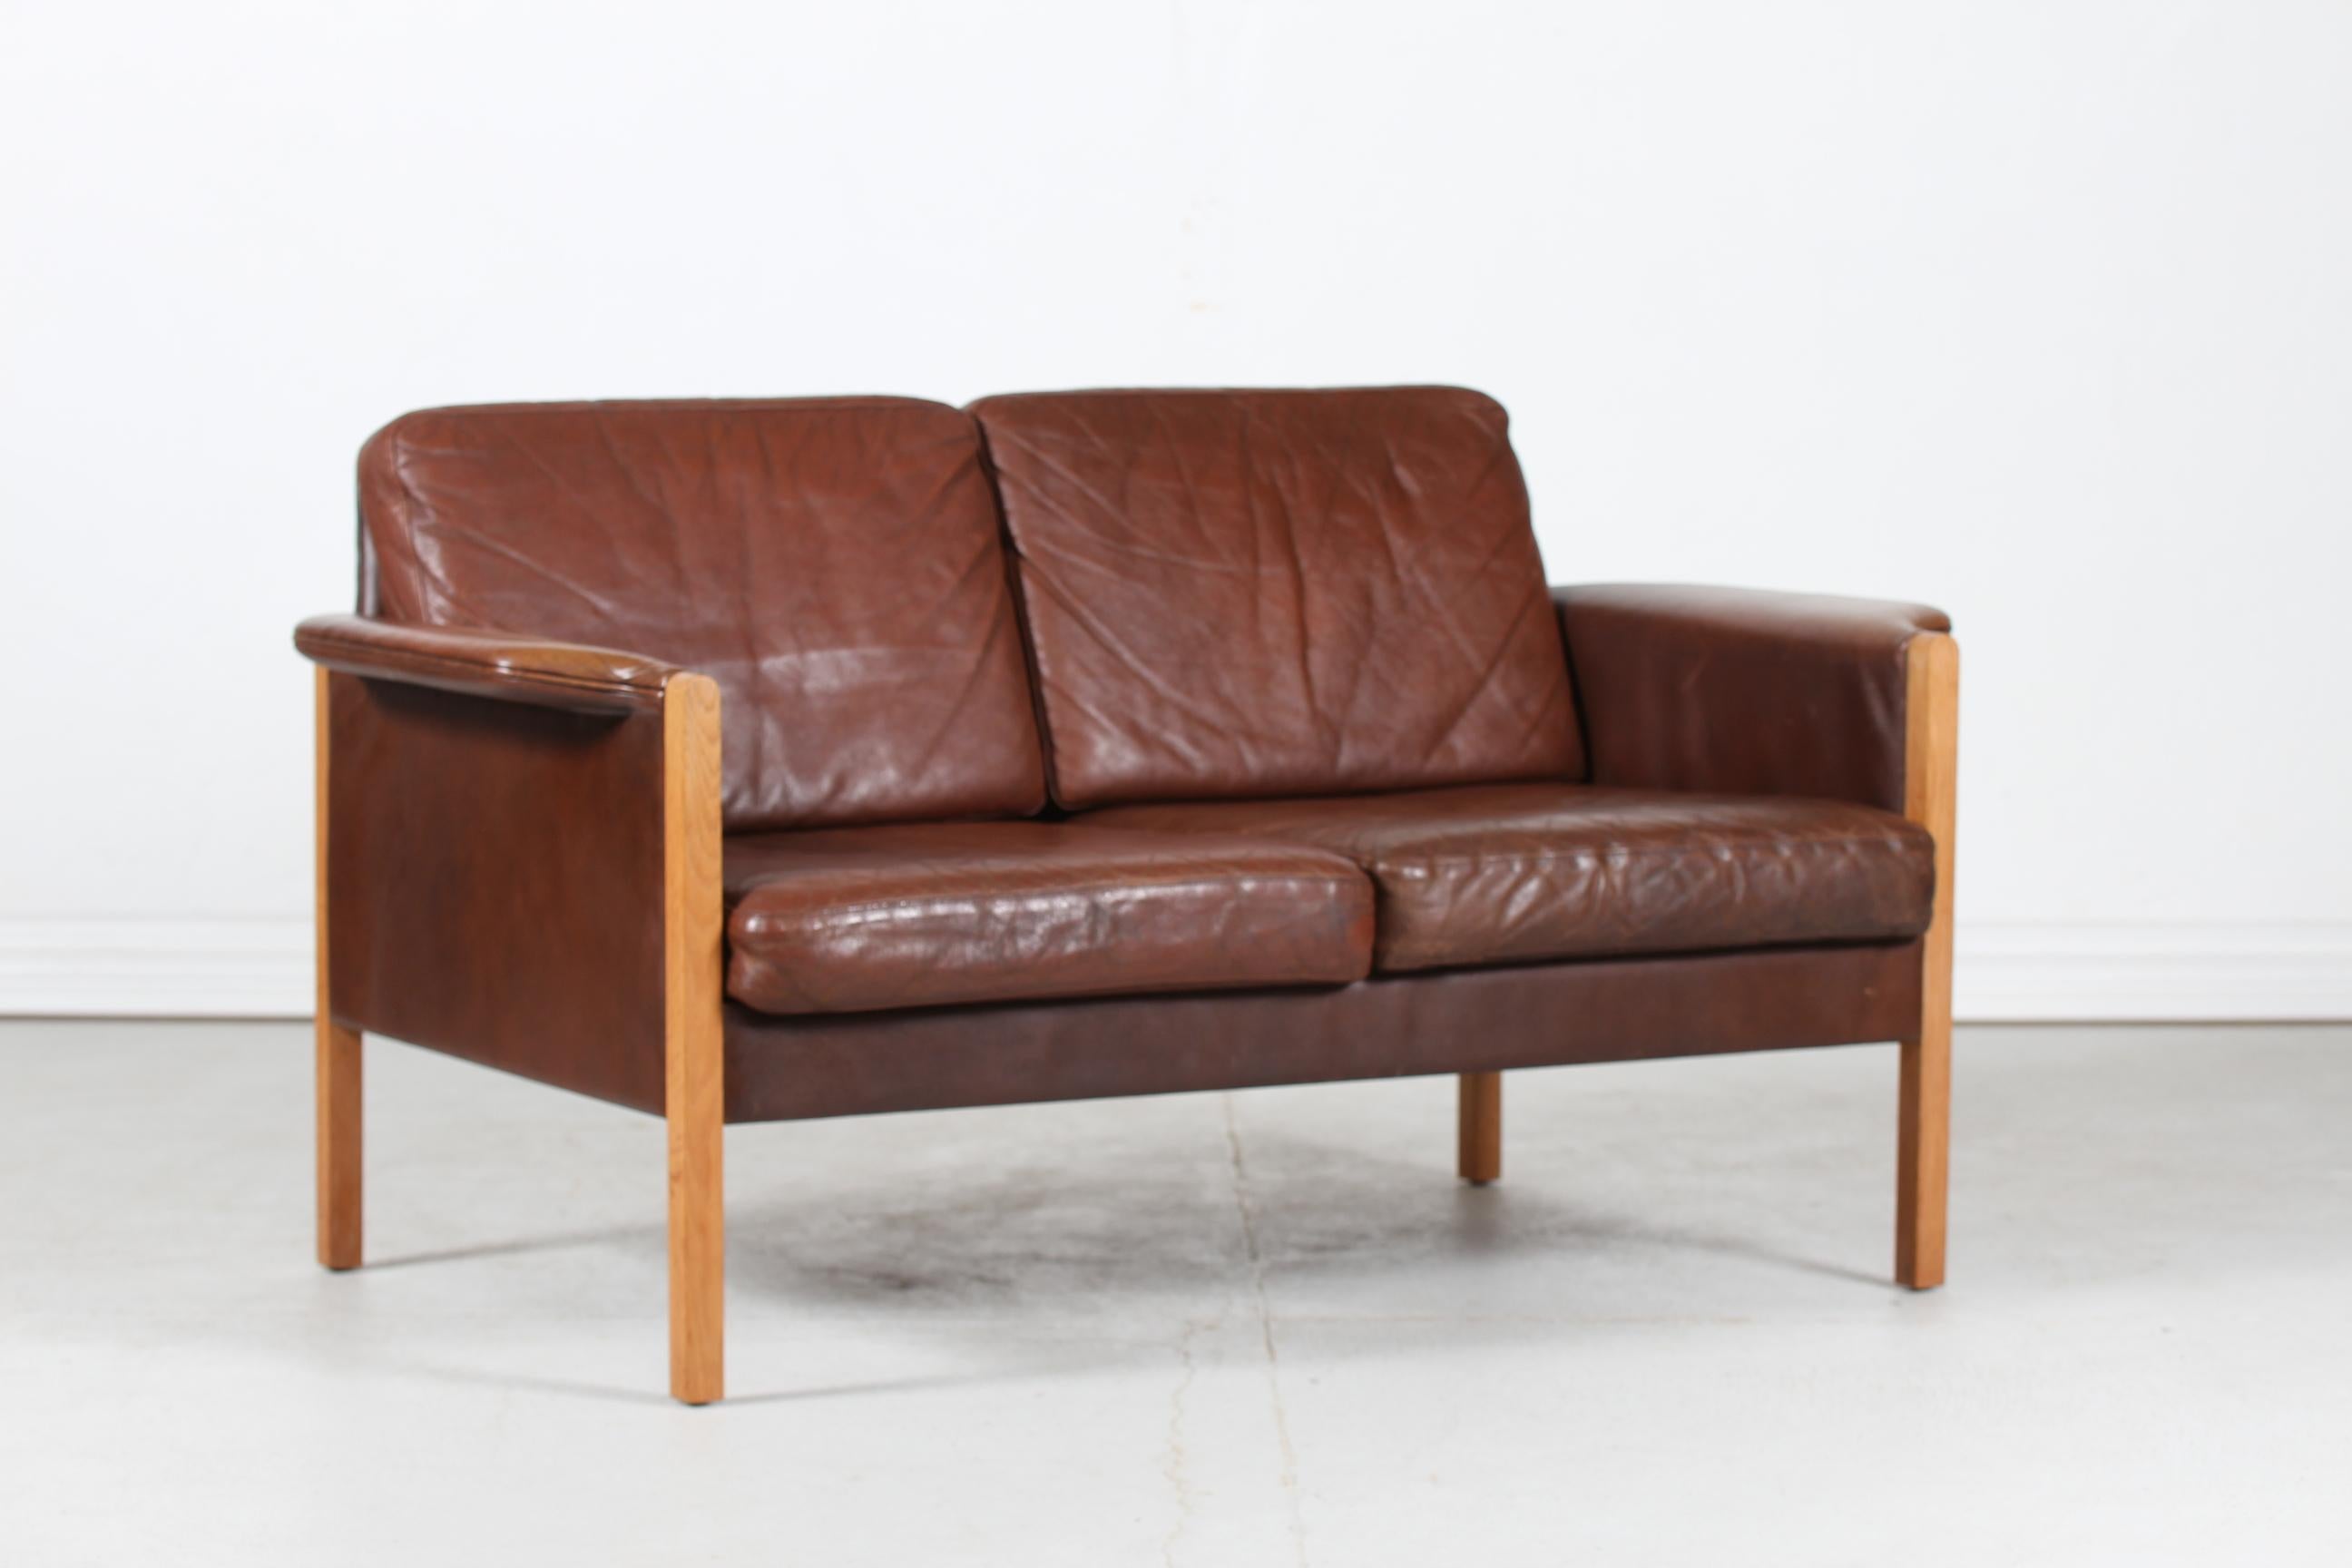 Danish vintage sofa for 2 persons in the style of Finn Juhl manufactured in Denmark in the 1970s.
It's upholstered with the original dark cognac-colored leather/almost brown with light patina after use and age. 
The legs and frame are made of